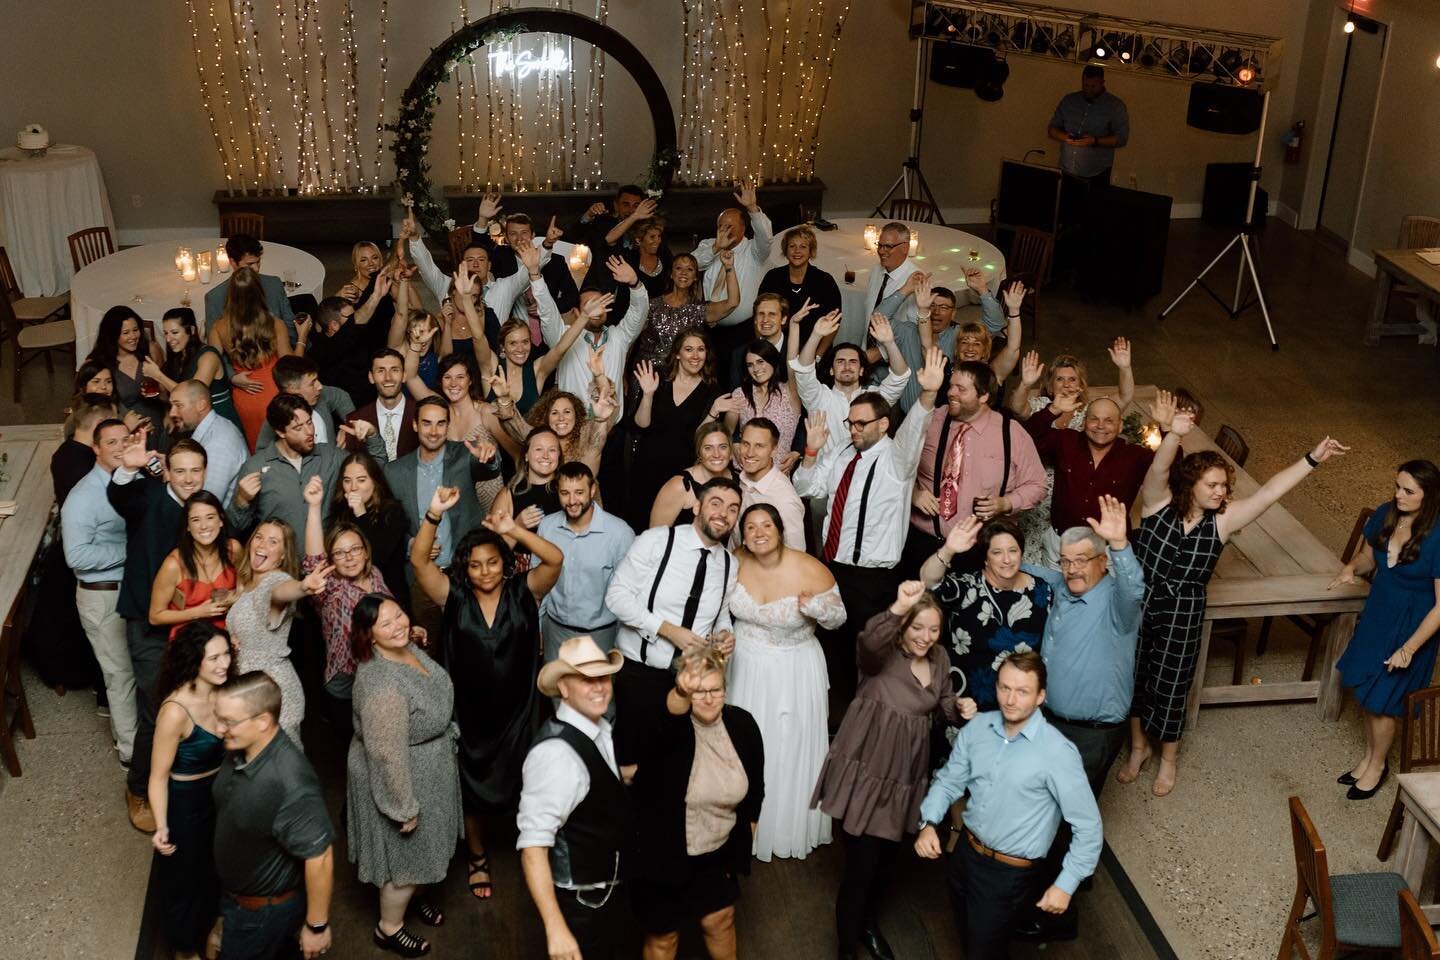 Nothing is better than a packed dance floor on your wedding day, I swear. Umm also, balcony in a reception space? Sign me up &amp; catch me running up those stairs to snag those birds-eye view of you dancing away celebrating forever with your favorit